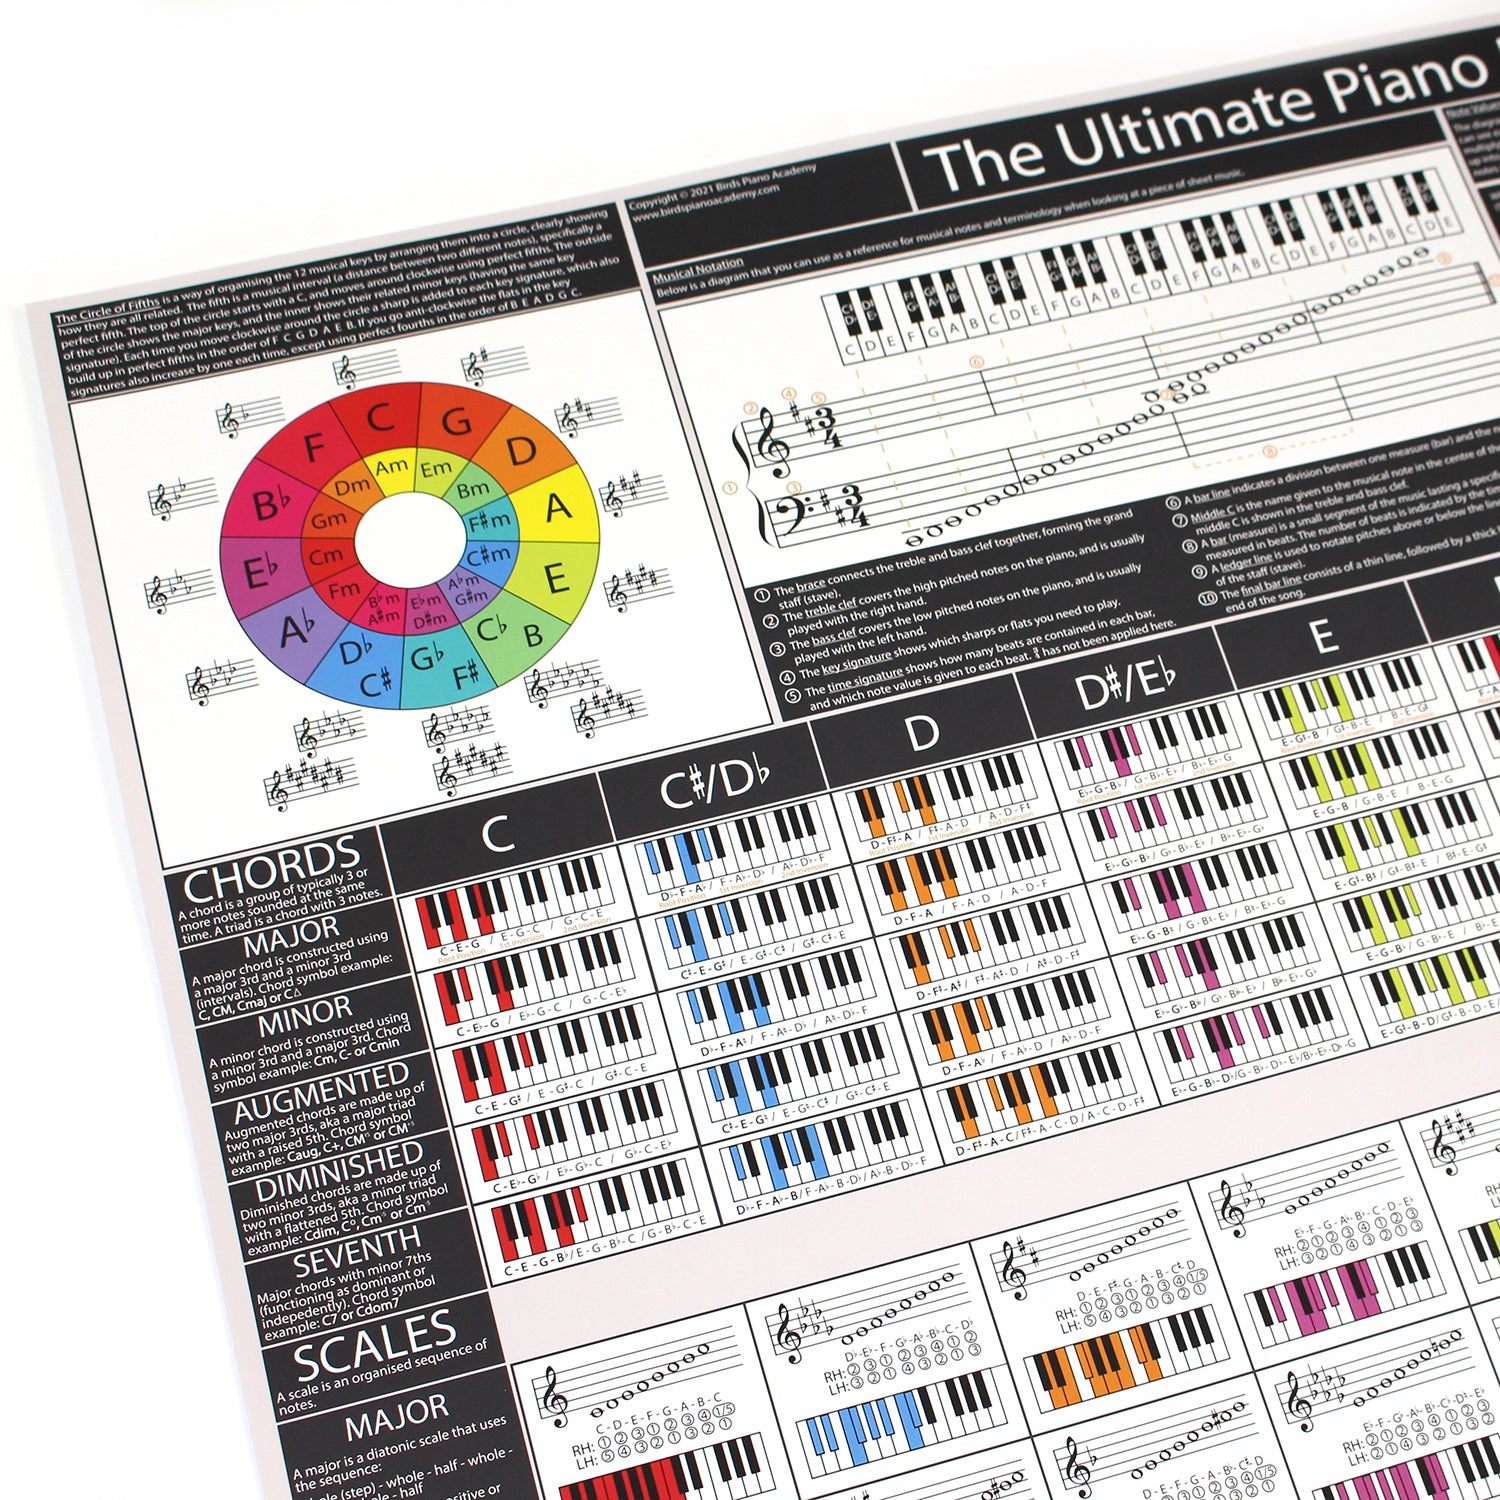 The Ultimate Piano Poster (Grey) - Piano Chords Chart, Scales Chart & Music Theory Print